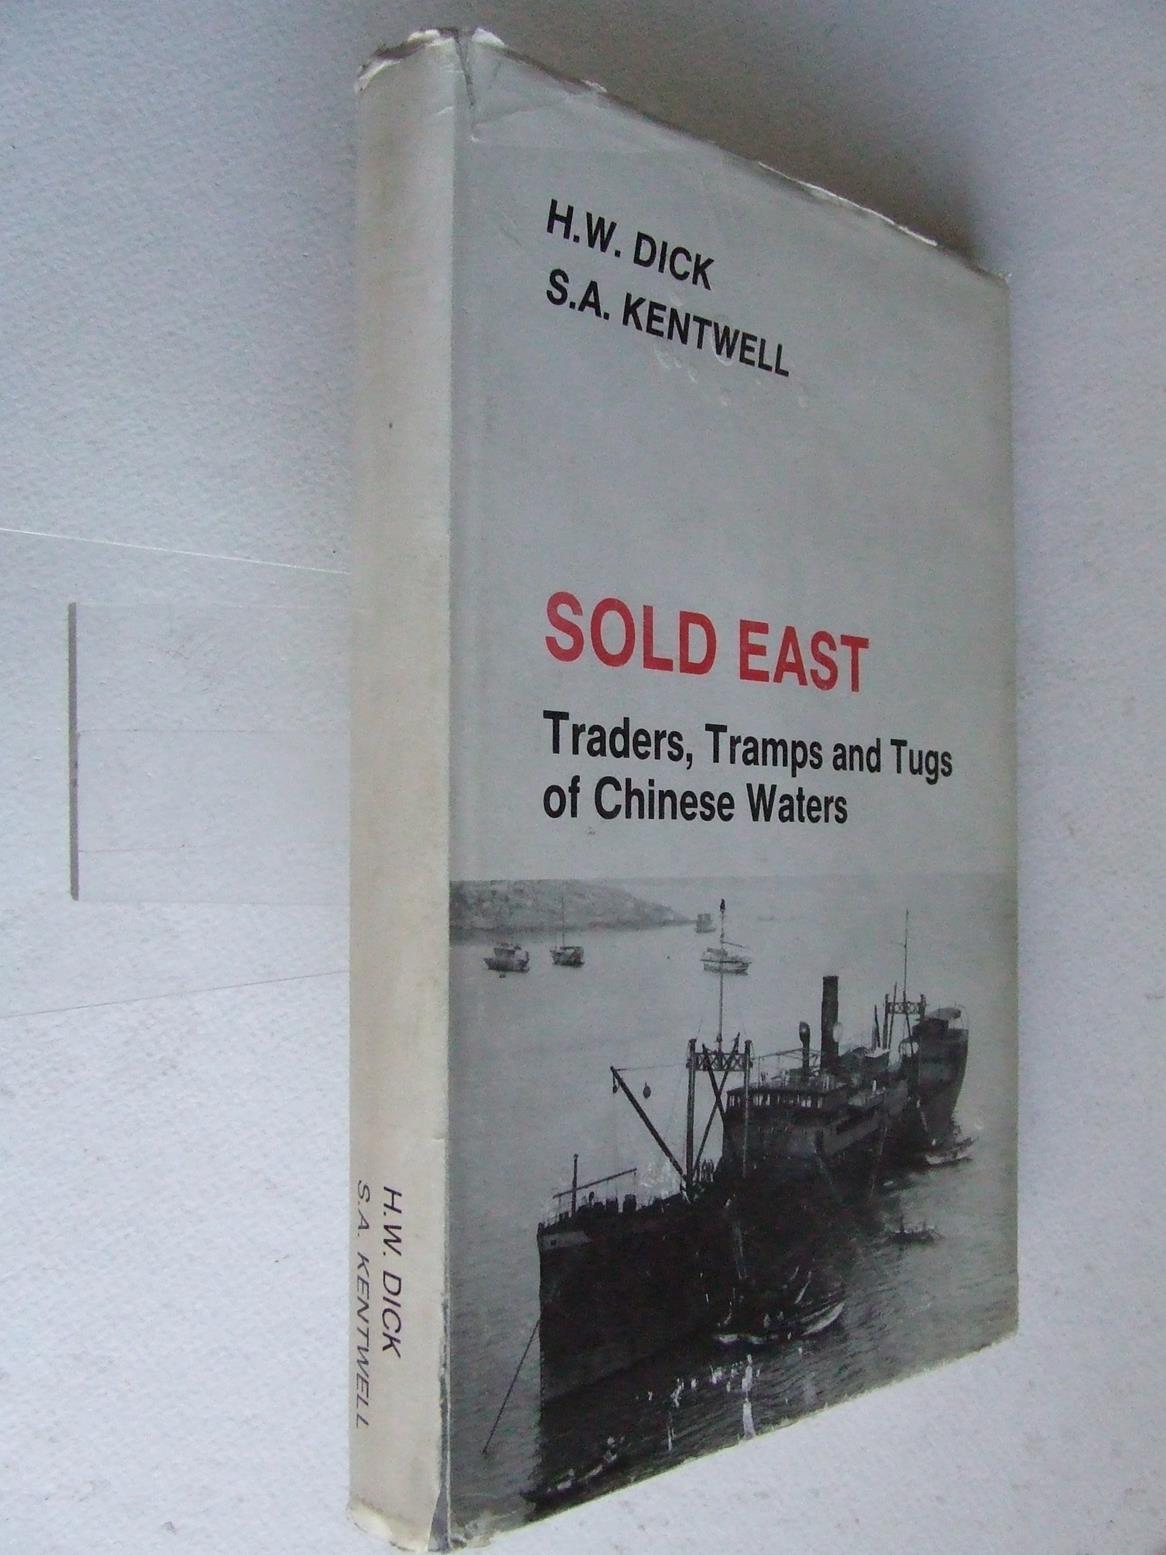 Sold East, traders, tramps and tugs of Chinese Waters